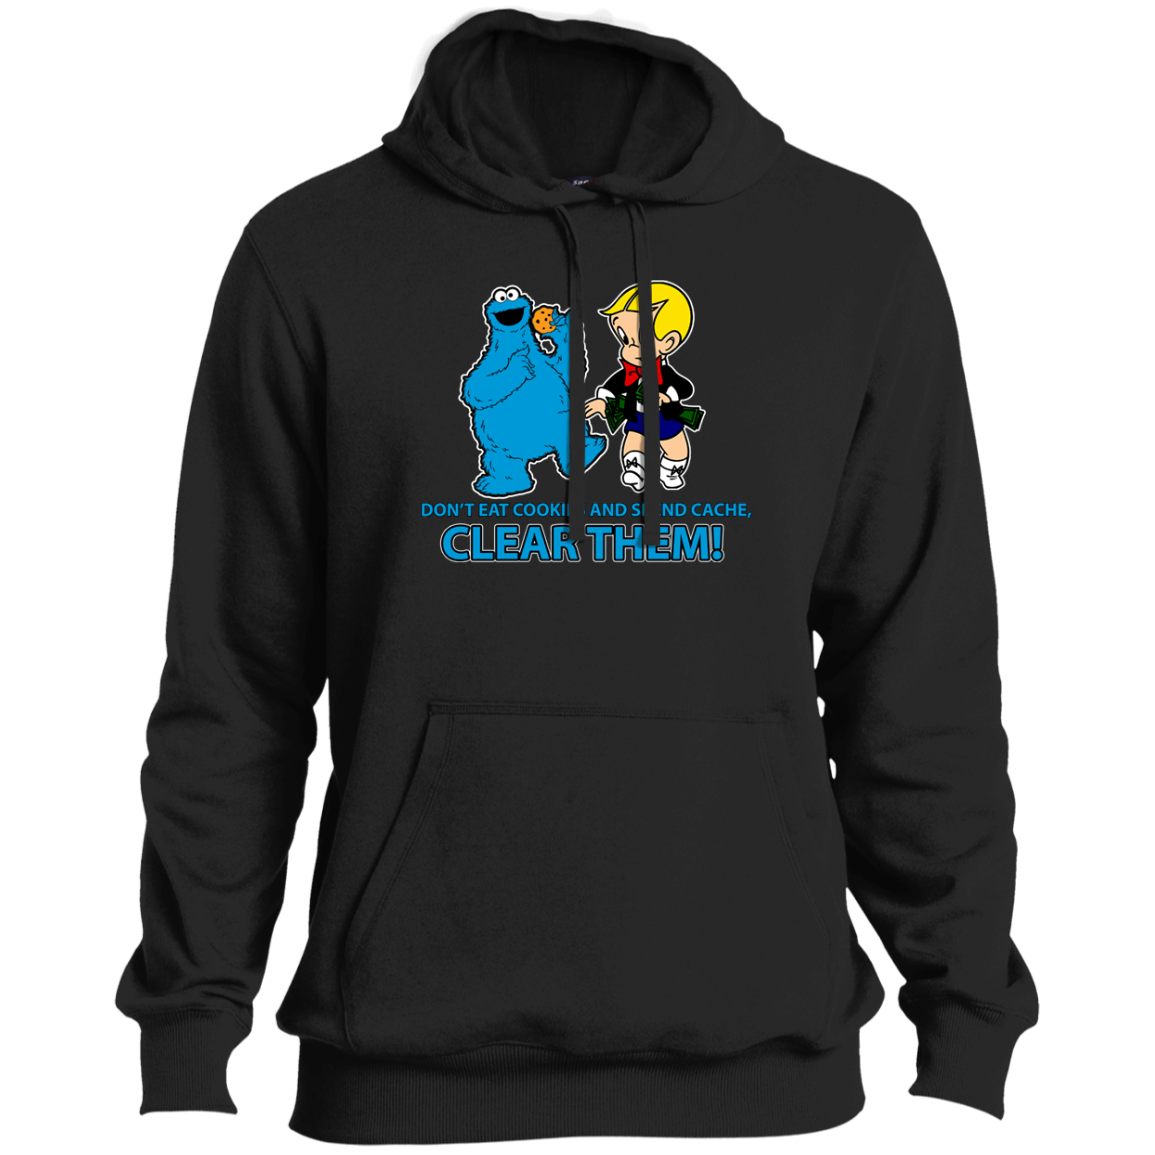 ArtichokeUSA Custom Design. Don't Eat Cookies And Spend Cache! Delete Them! Cookie Monster and Richie Rich Fan Art/Parody. Tall Pullover Hoodie